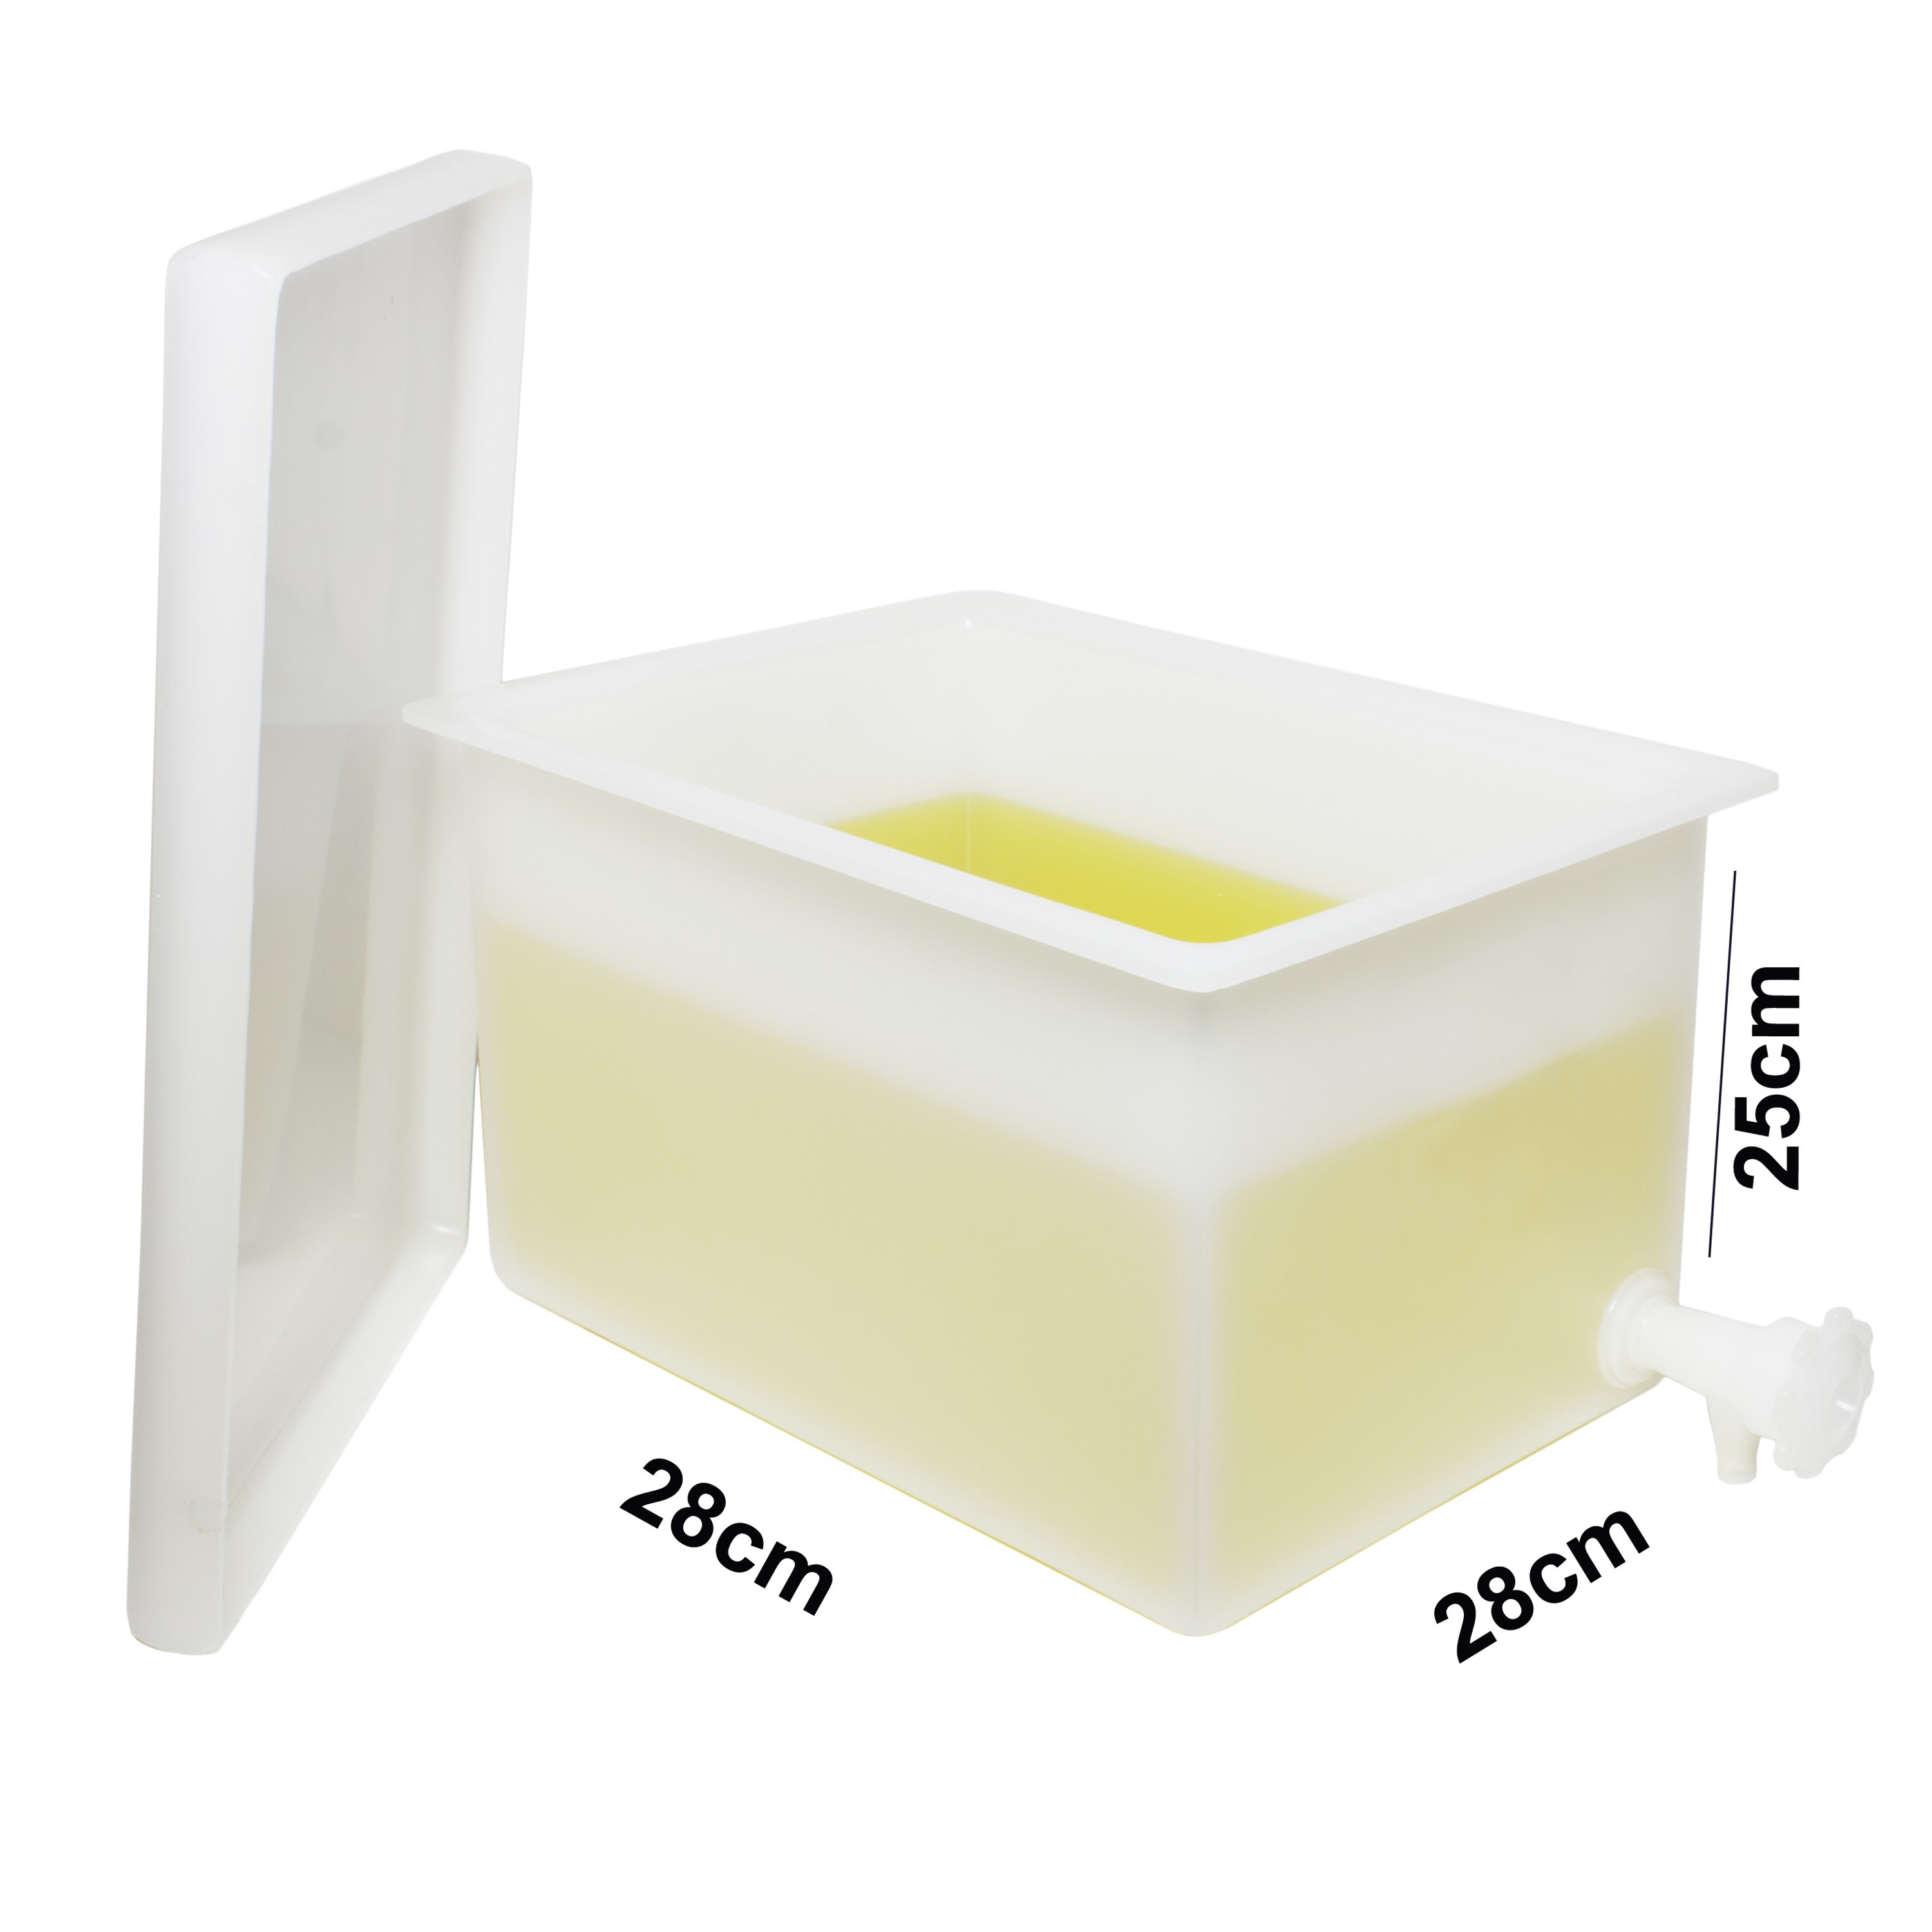 SP Bel-Art Heavy Duty Polyethylene Rectangular Tank with Top Flanges and Faucet; 11 x 11 x 10 in.